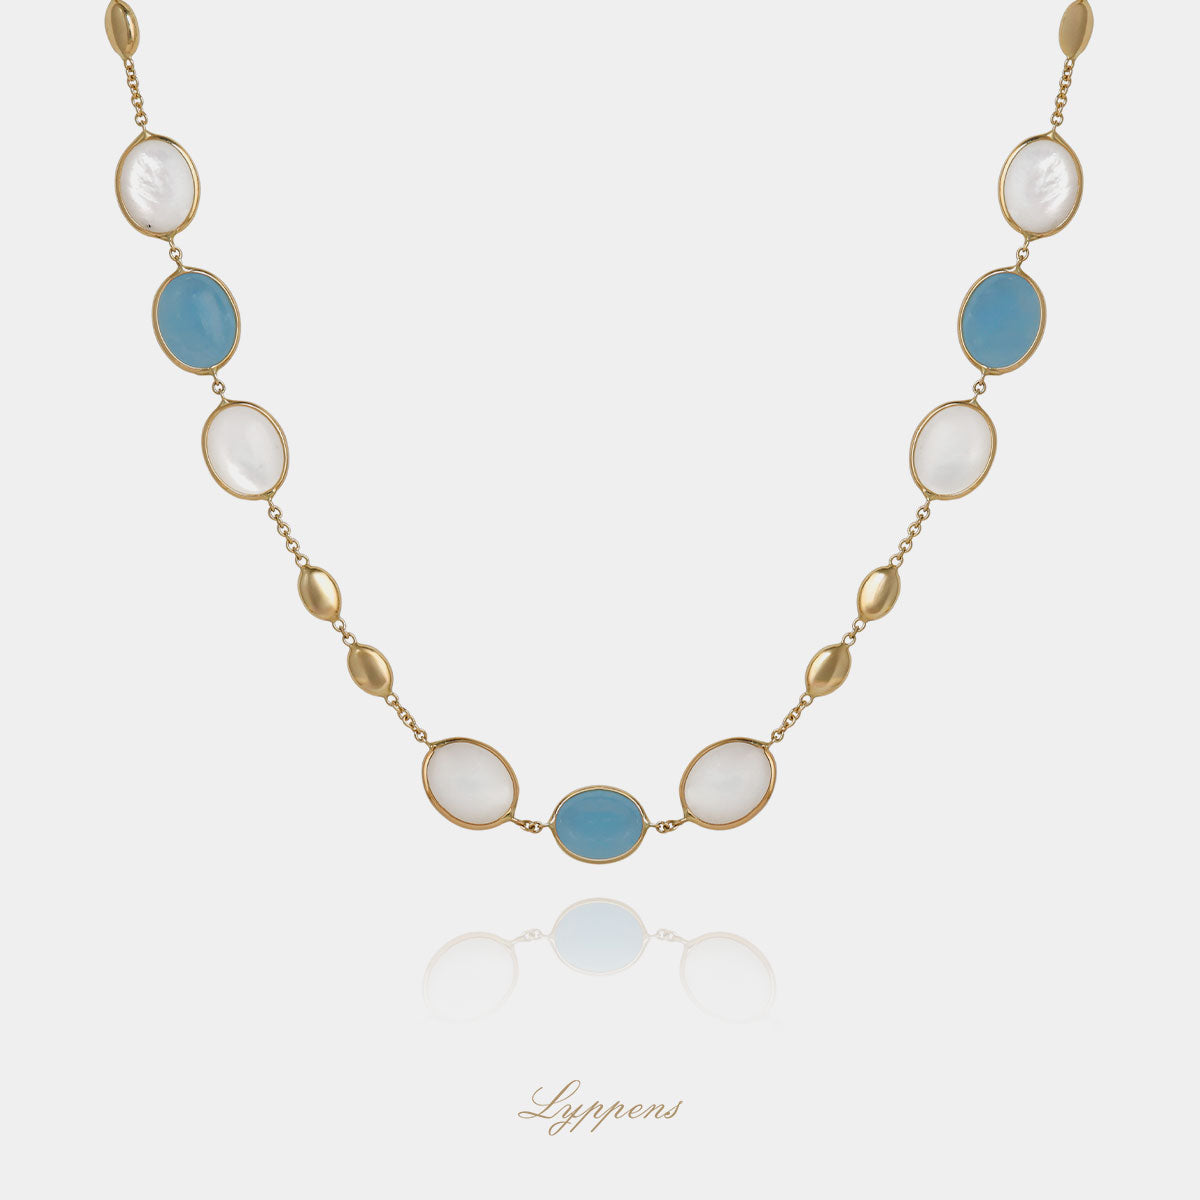 Yellow gold necklace with aquamarine and mother of pearl